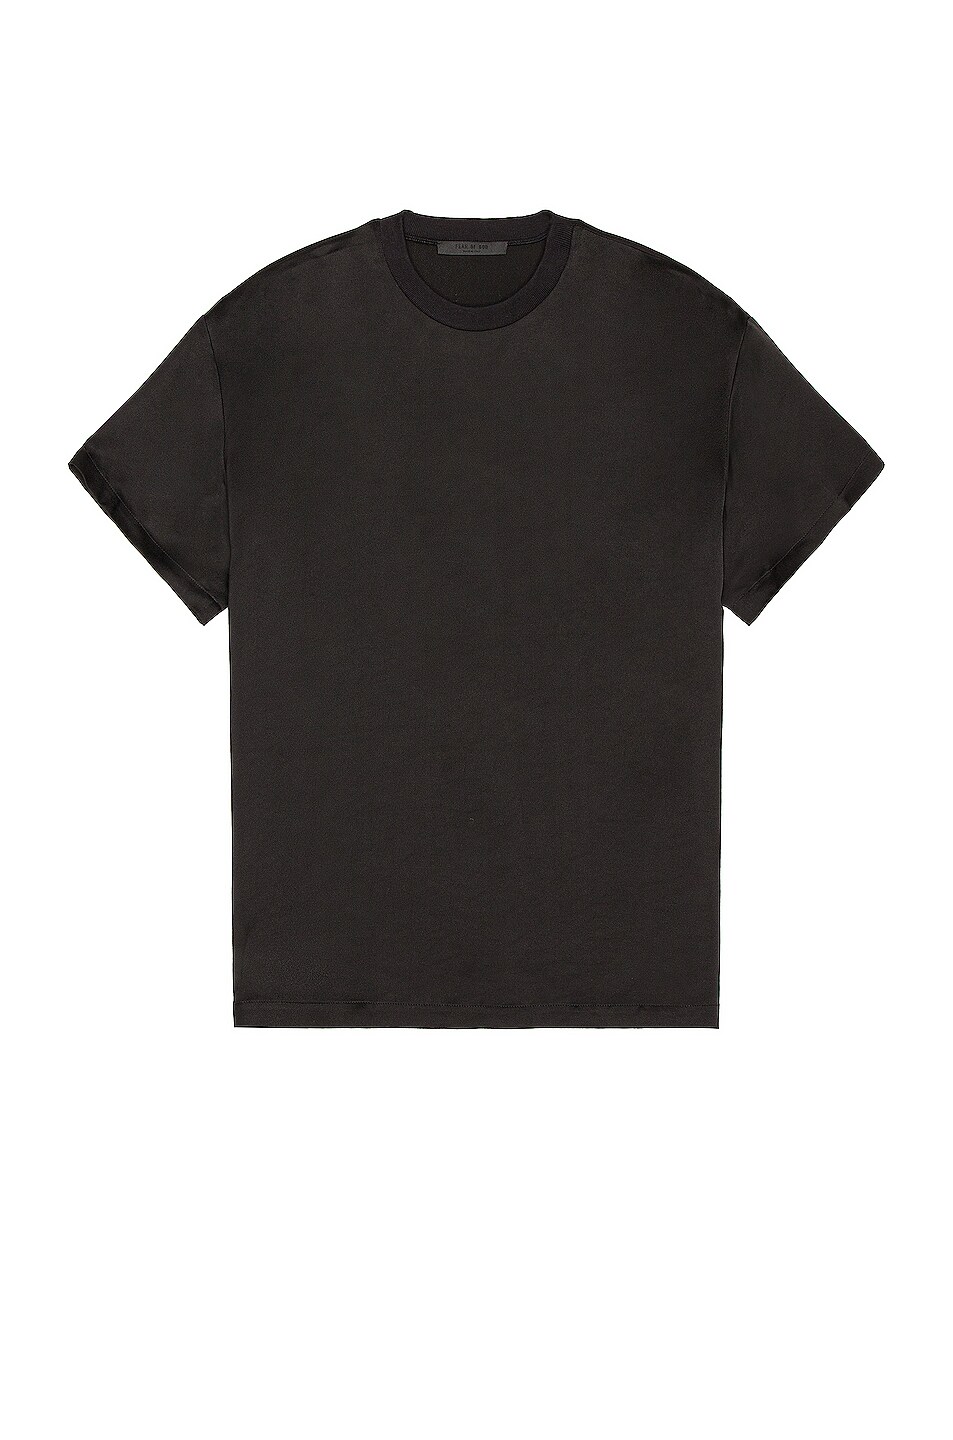 Image 1 of Fear of God Satin Tee in Black